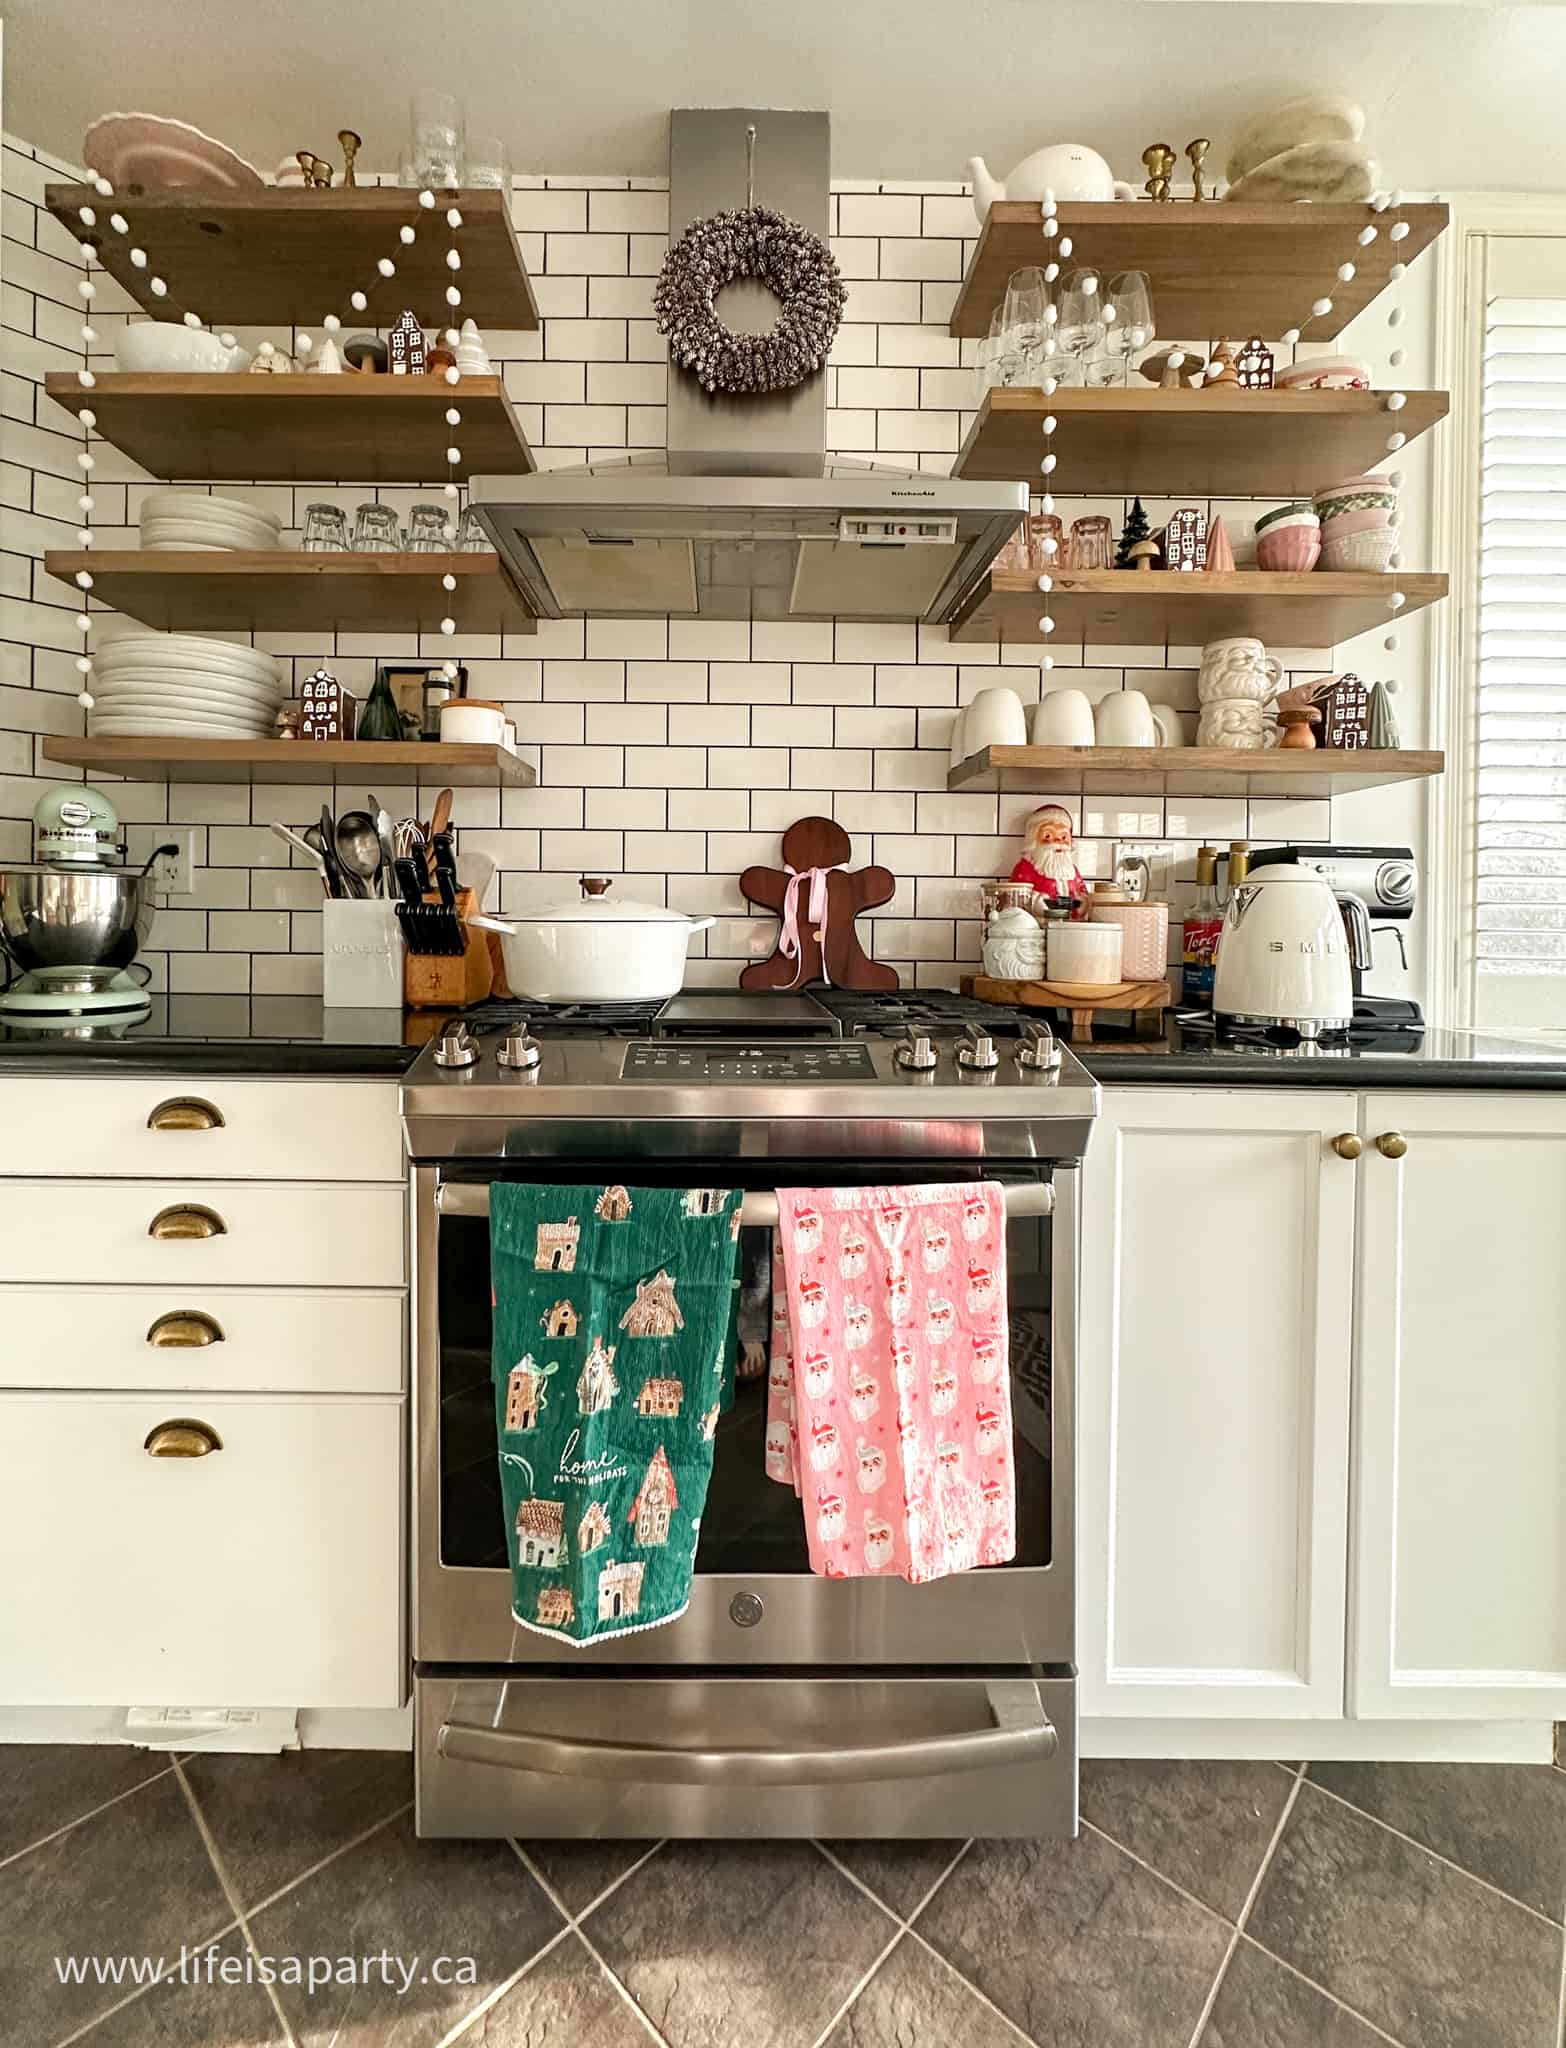 open kitchen shelves decorated for Christmas